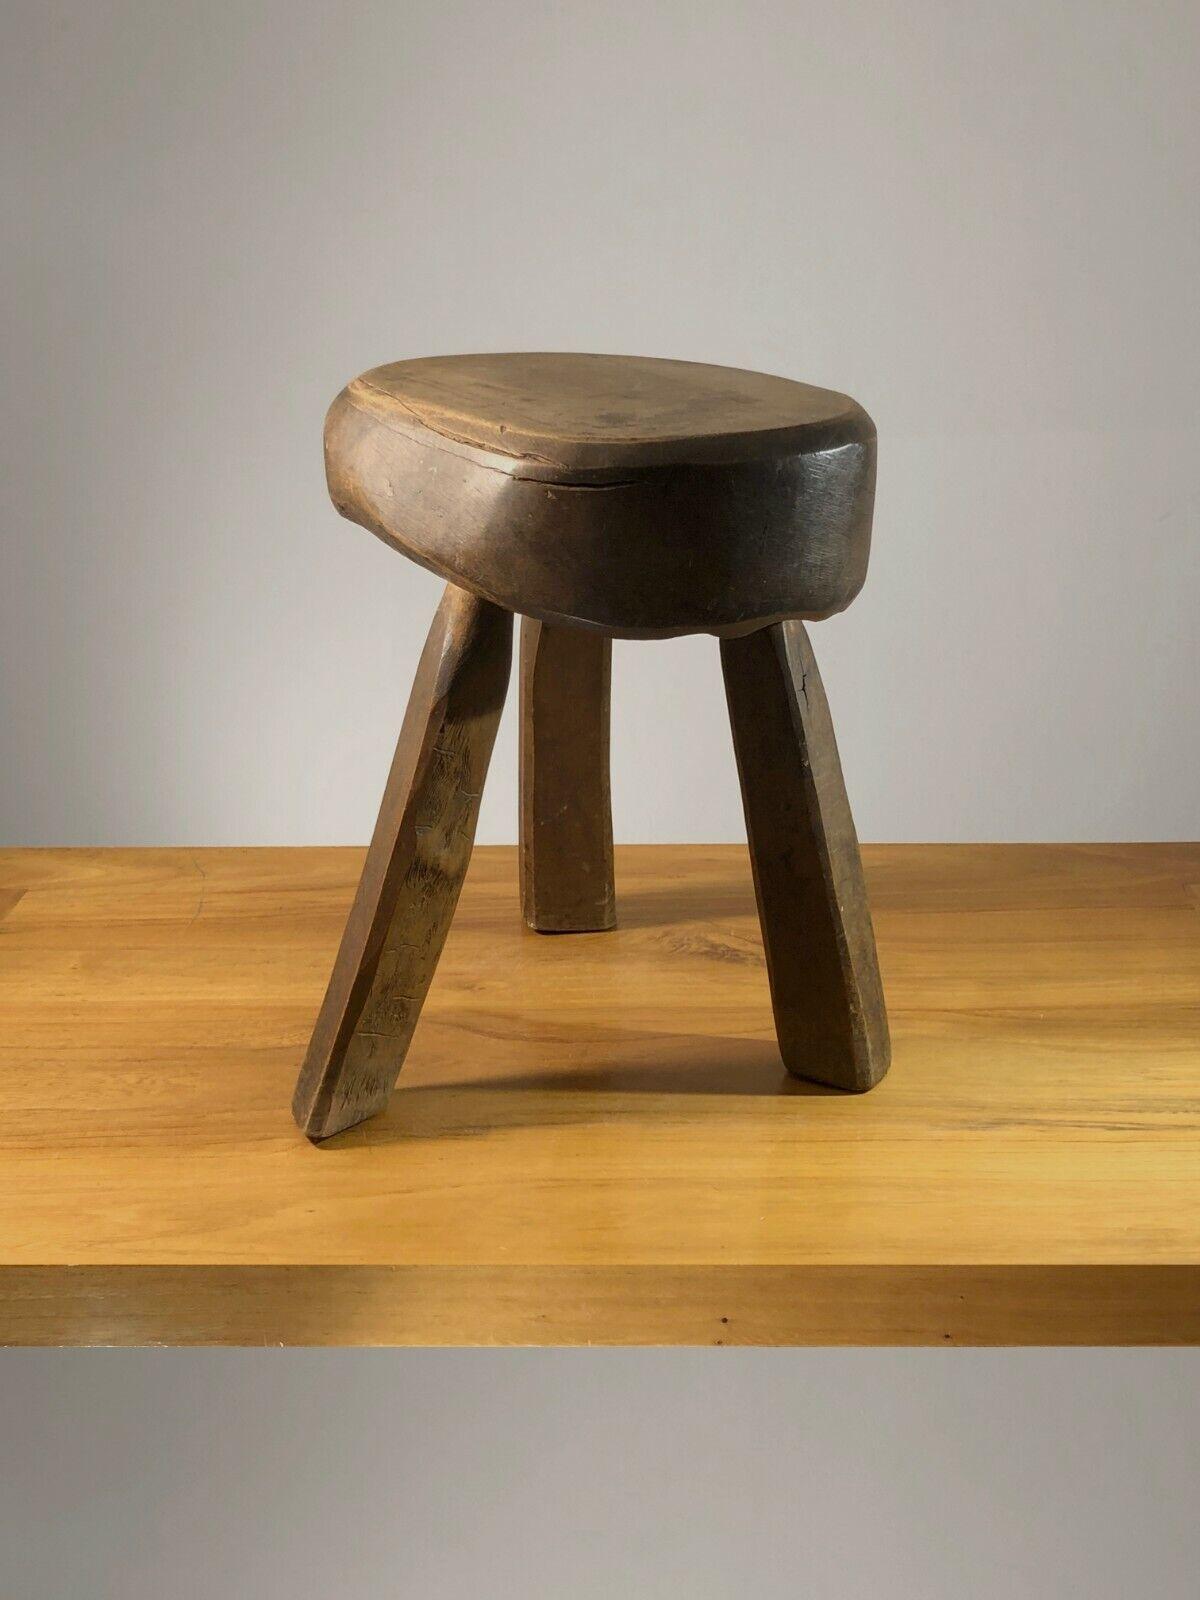 A BRUTALIST MID-CENTURY-MODERN RUSTIC STOOL, MAROLLES Style, France 1950 For Sale 2